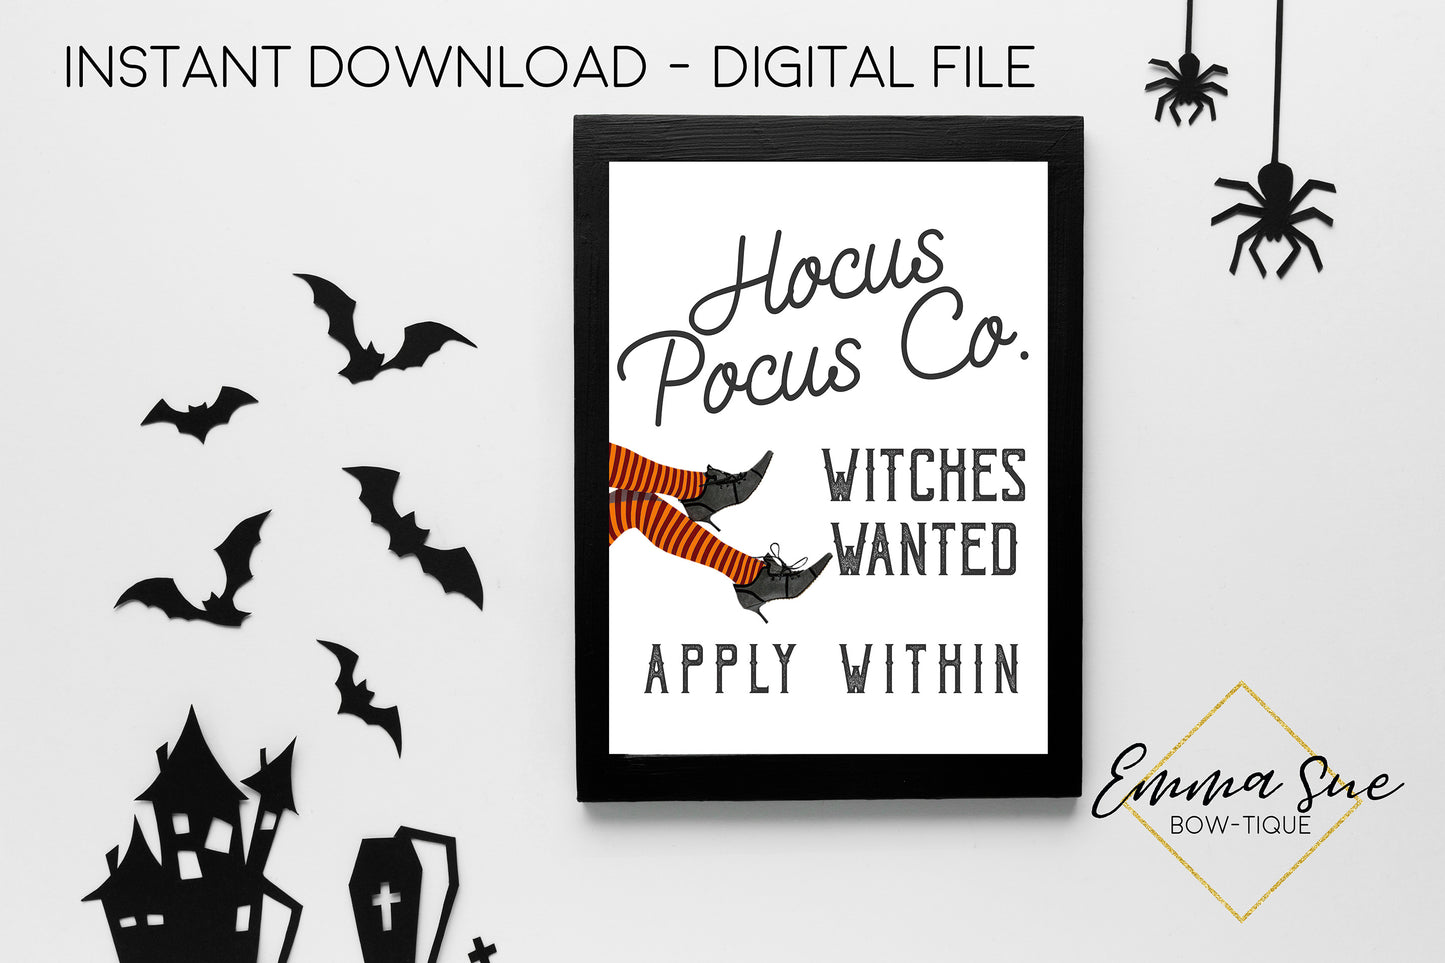 Hocus Pocus Co. Witches Wanted Apply within - Halloween Decoration Printable Art Sign - Digital File